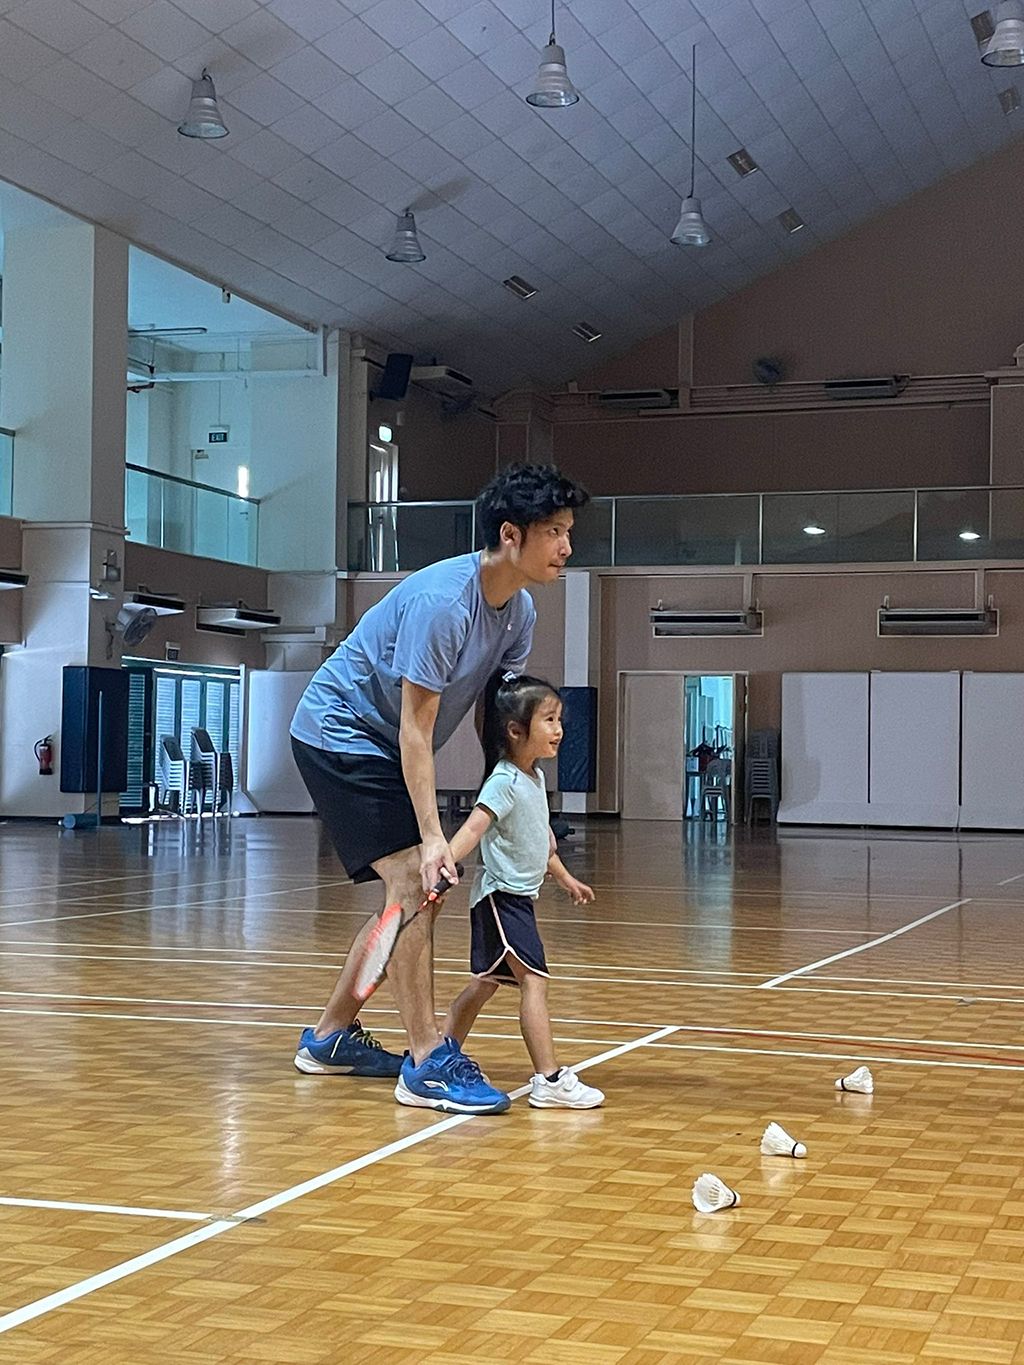 Derek coaching his daughter on how to hold the racquet, during their family exercise time